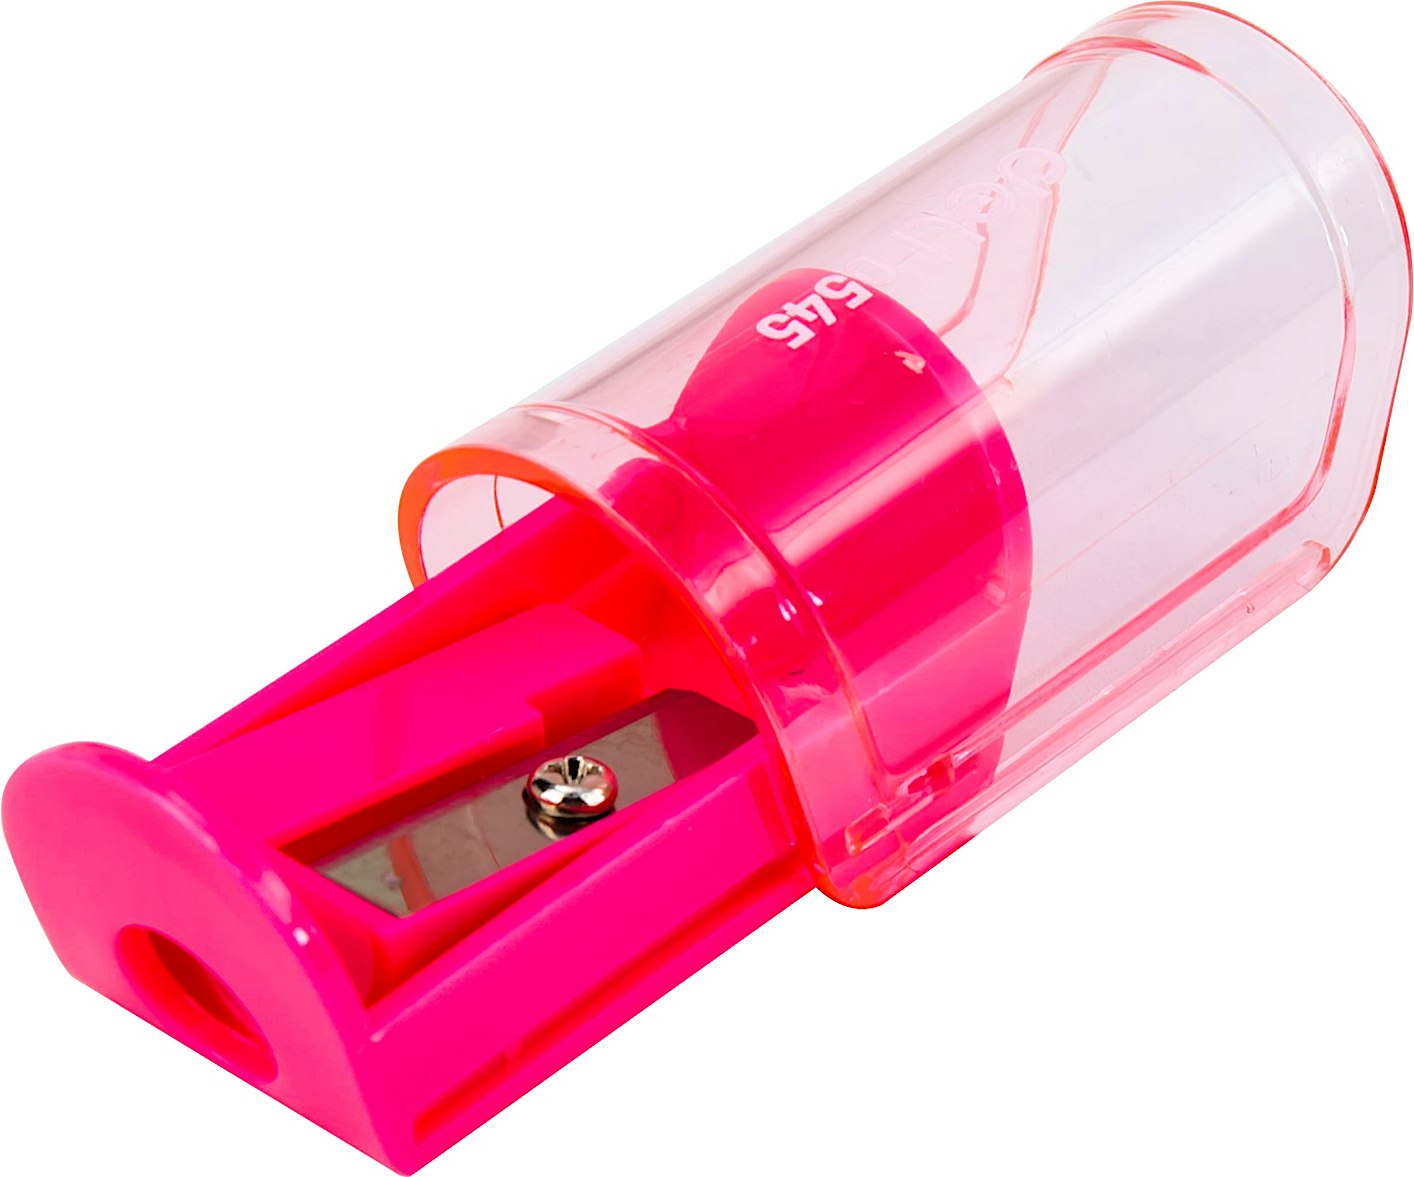 Deli Pencil Sharpener with Canister Assistant Pink 1's